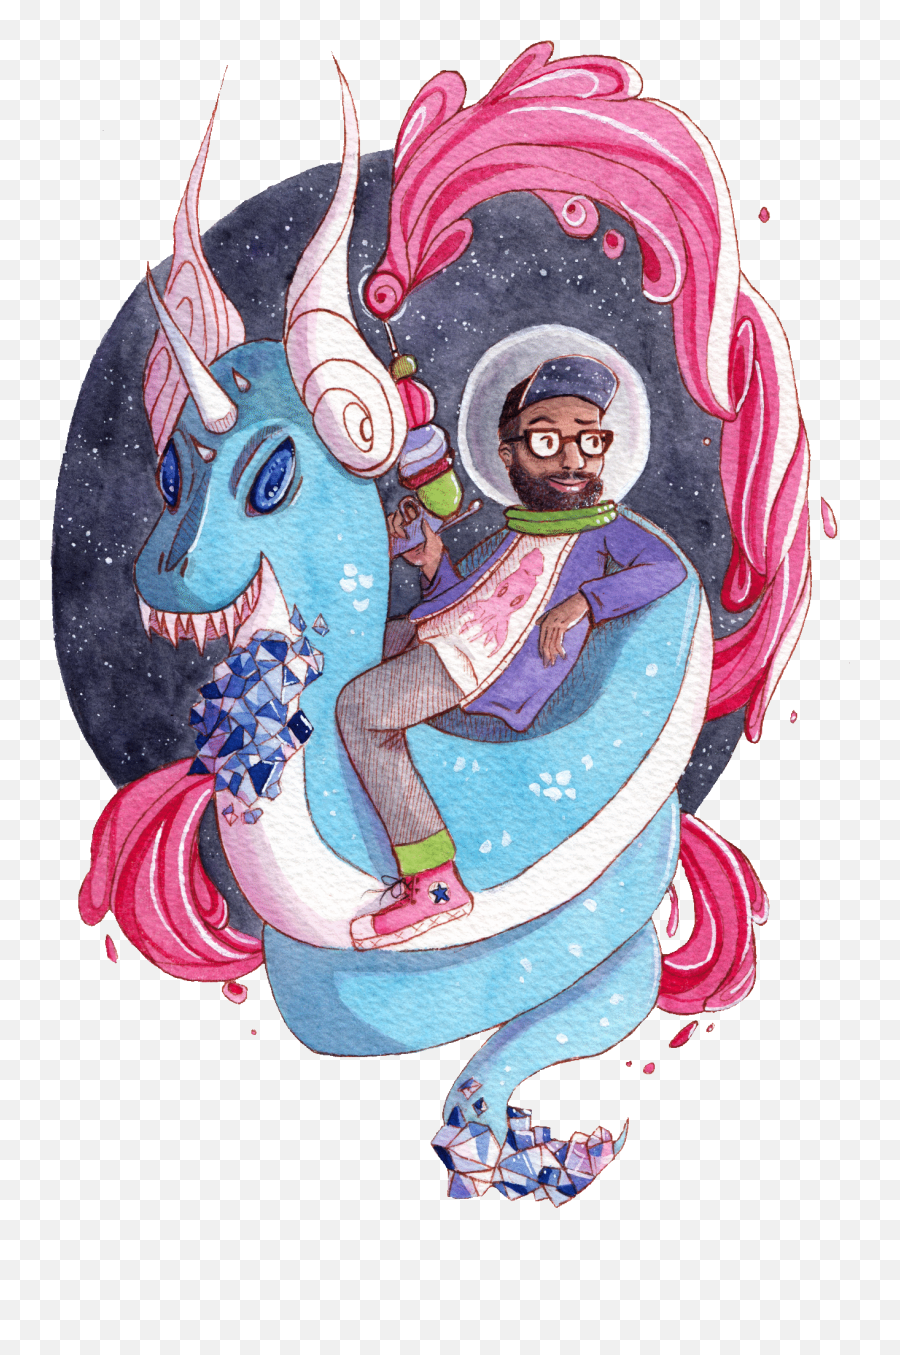 Download Commission Of The Most Fantabulous Riding A - Mythical Creature Png,Holly Garland Png